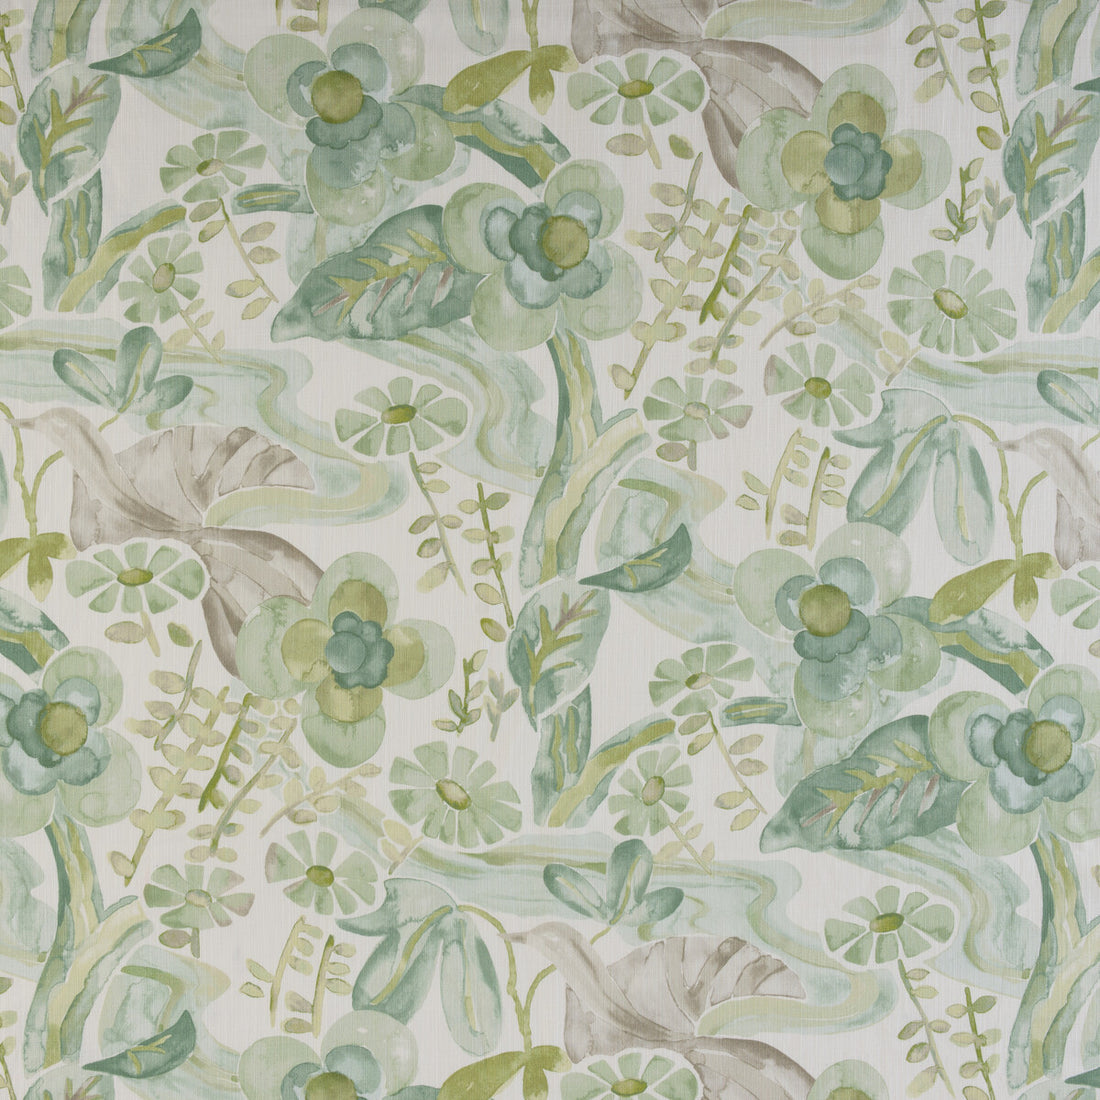 Faerie fabric in watercress color - pattern FAERIE.13.0 - by Kravet Design in the Barbara Barry Home Midsummer collection